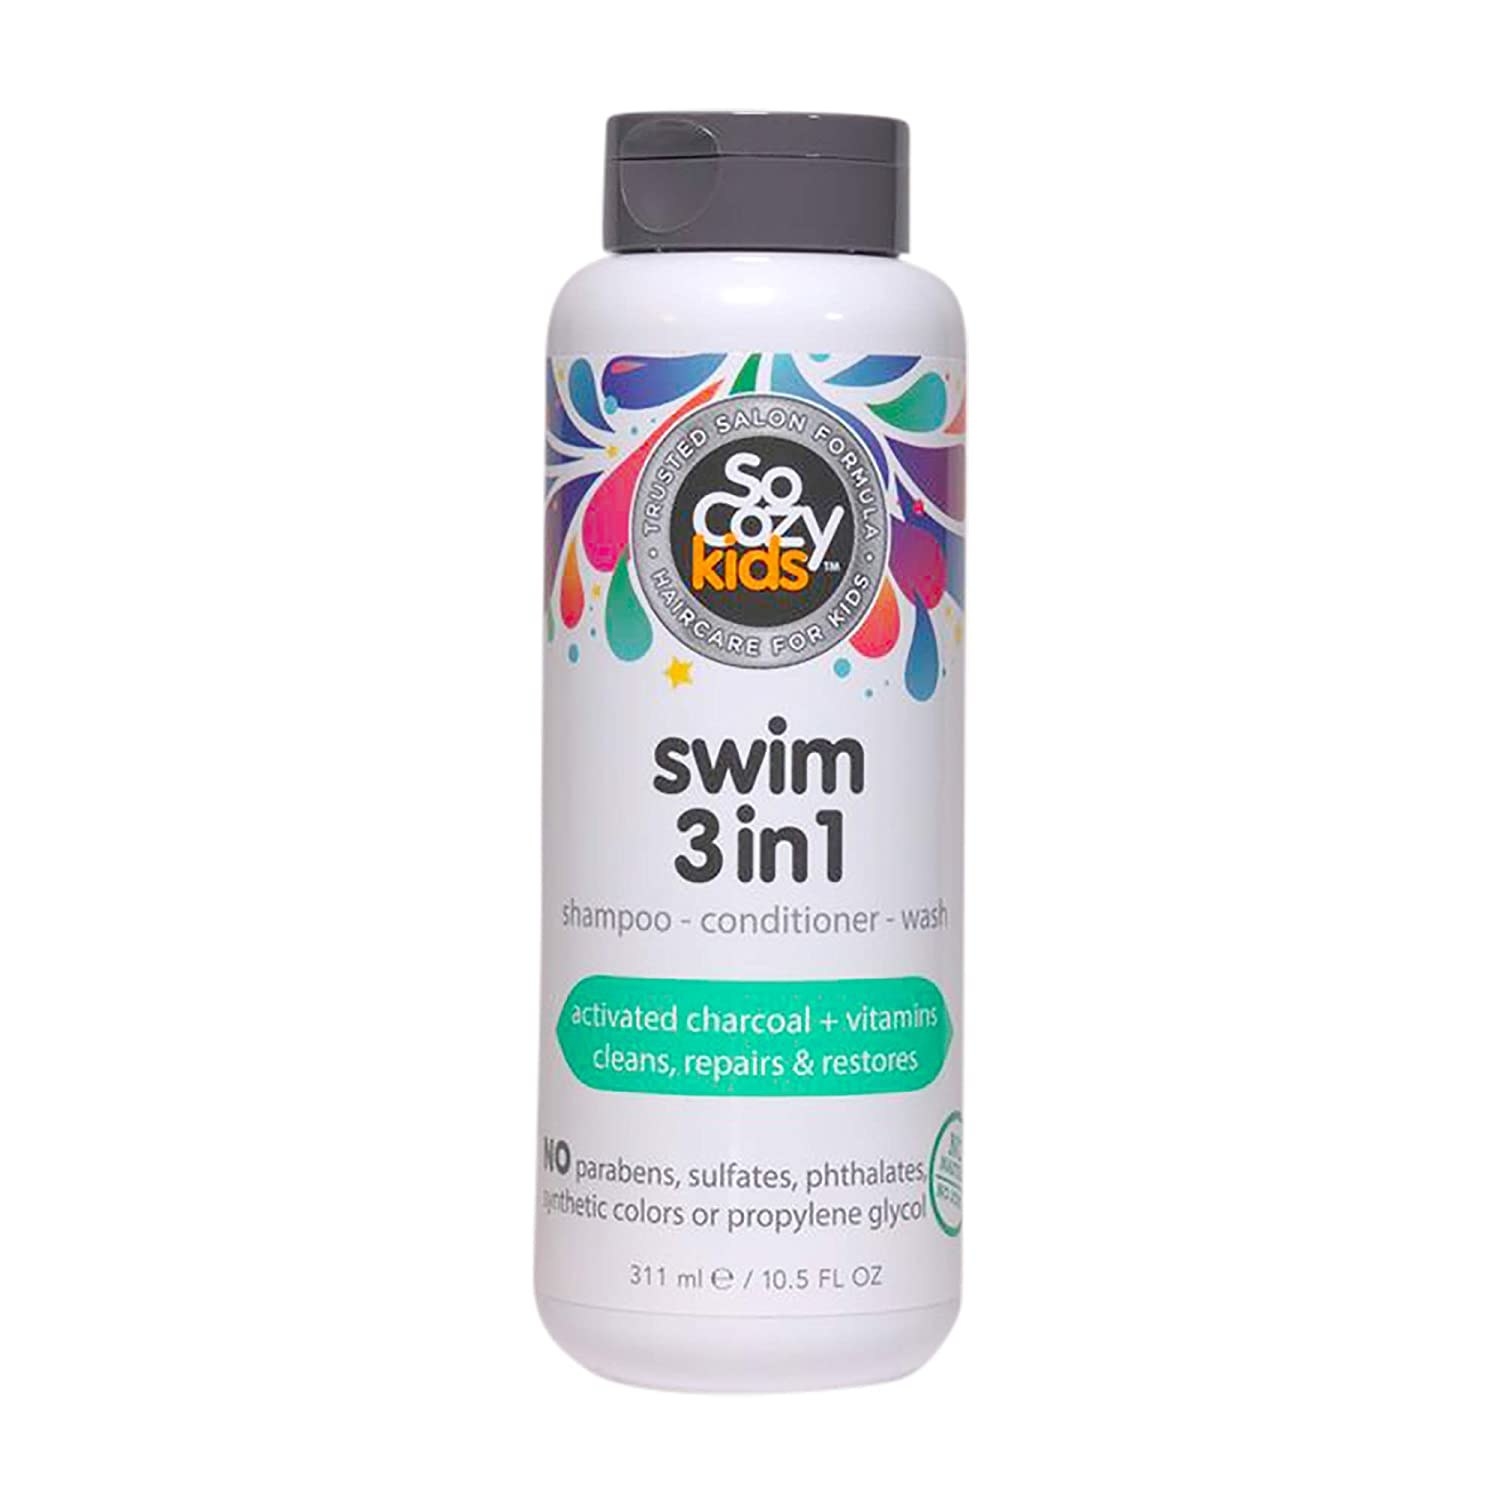 the swim shampoo, conditioner and body wash for kids